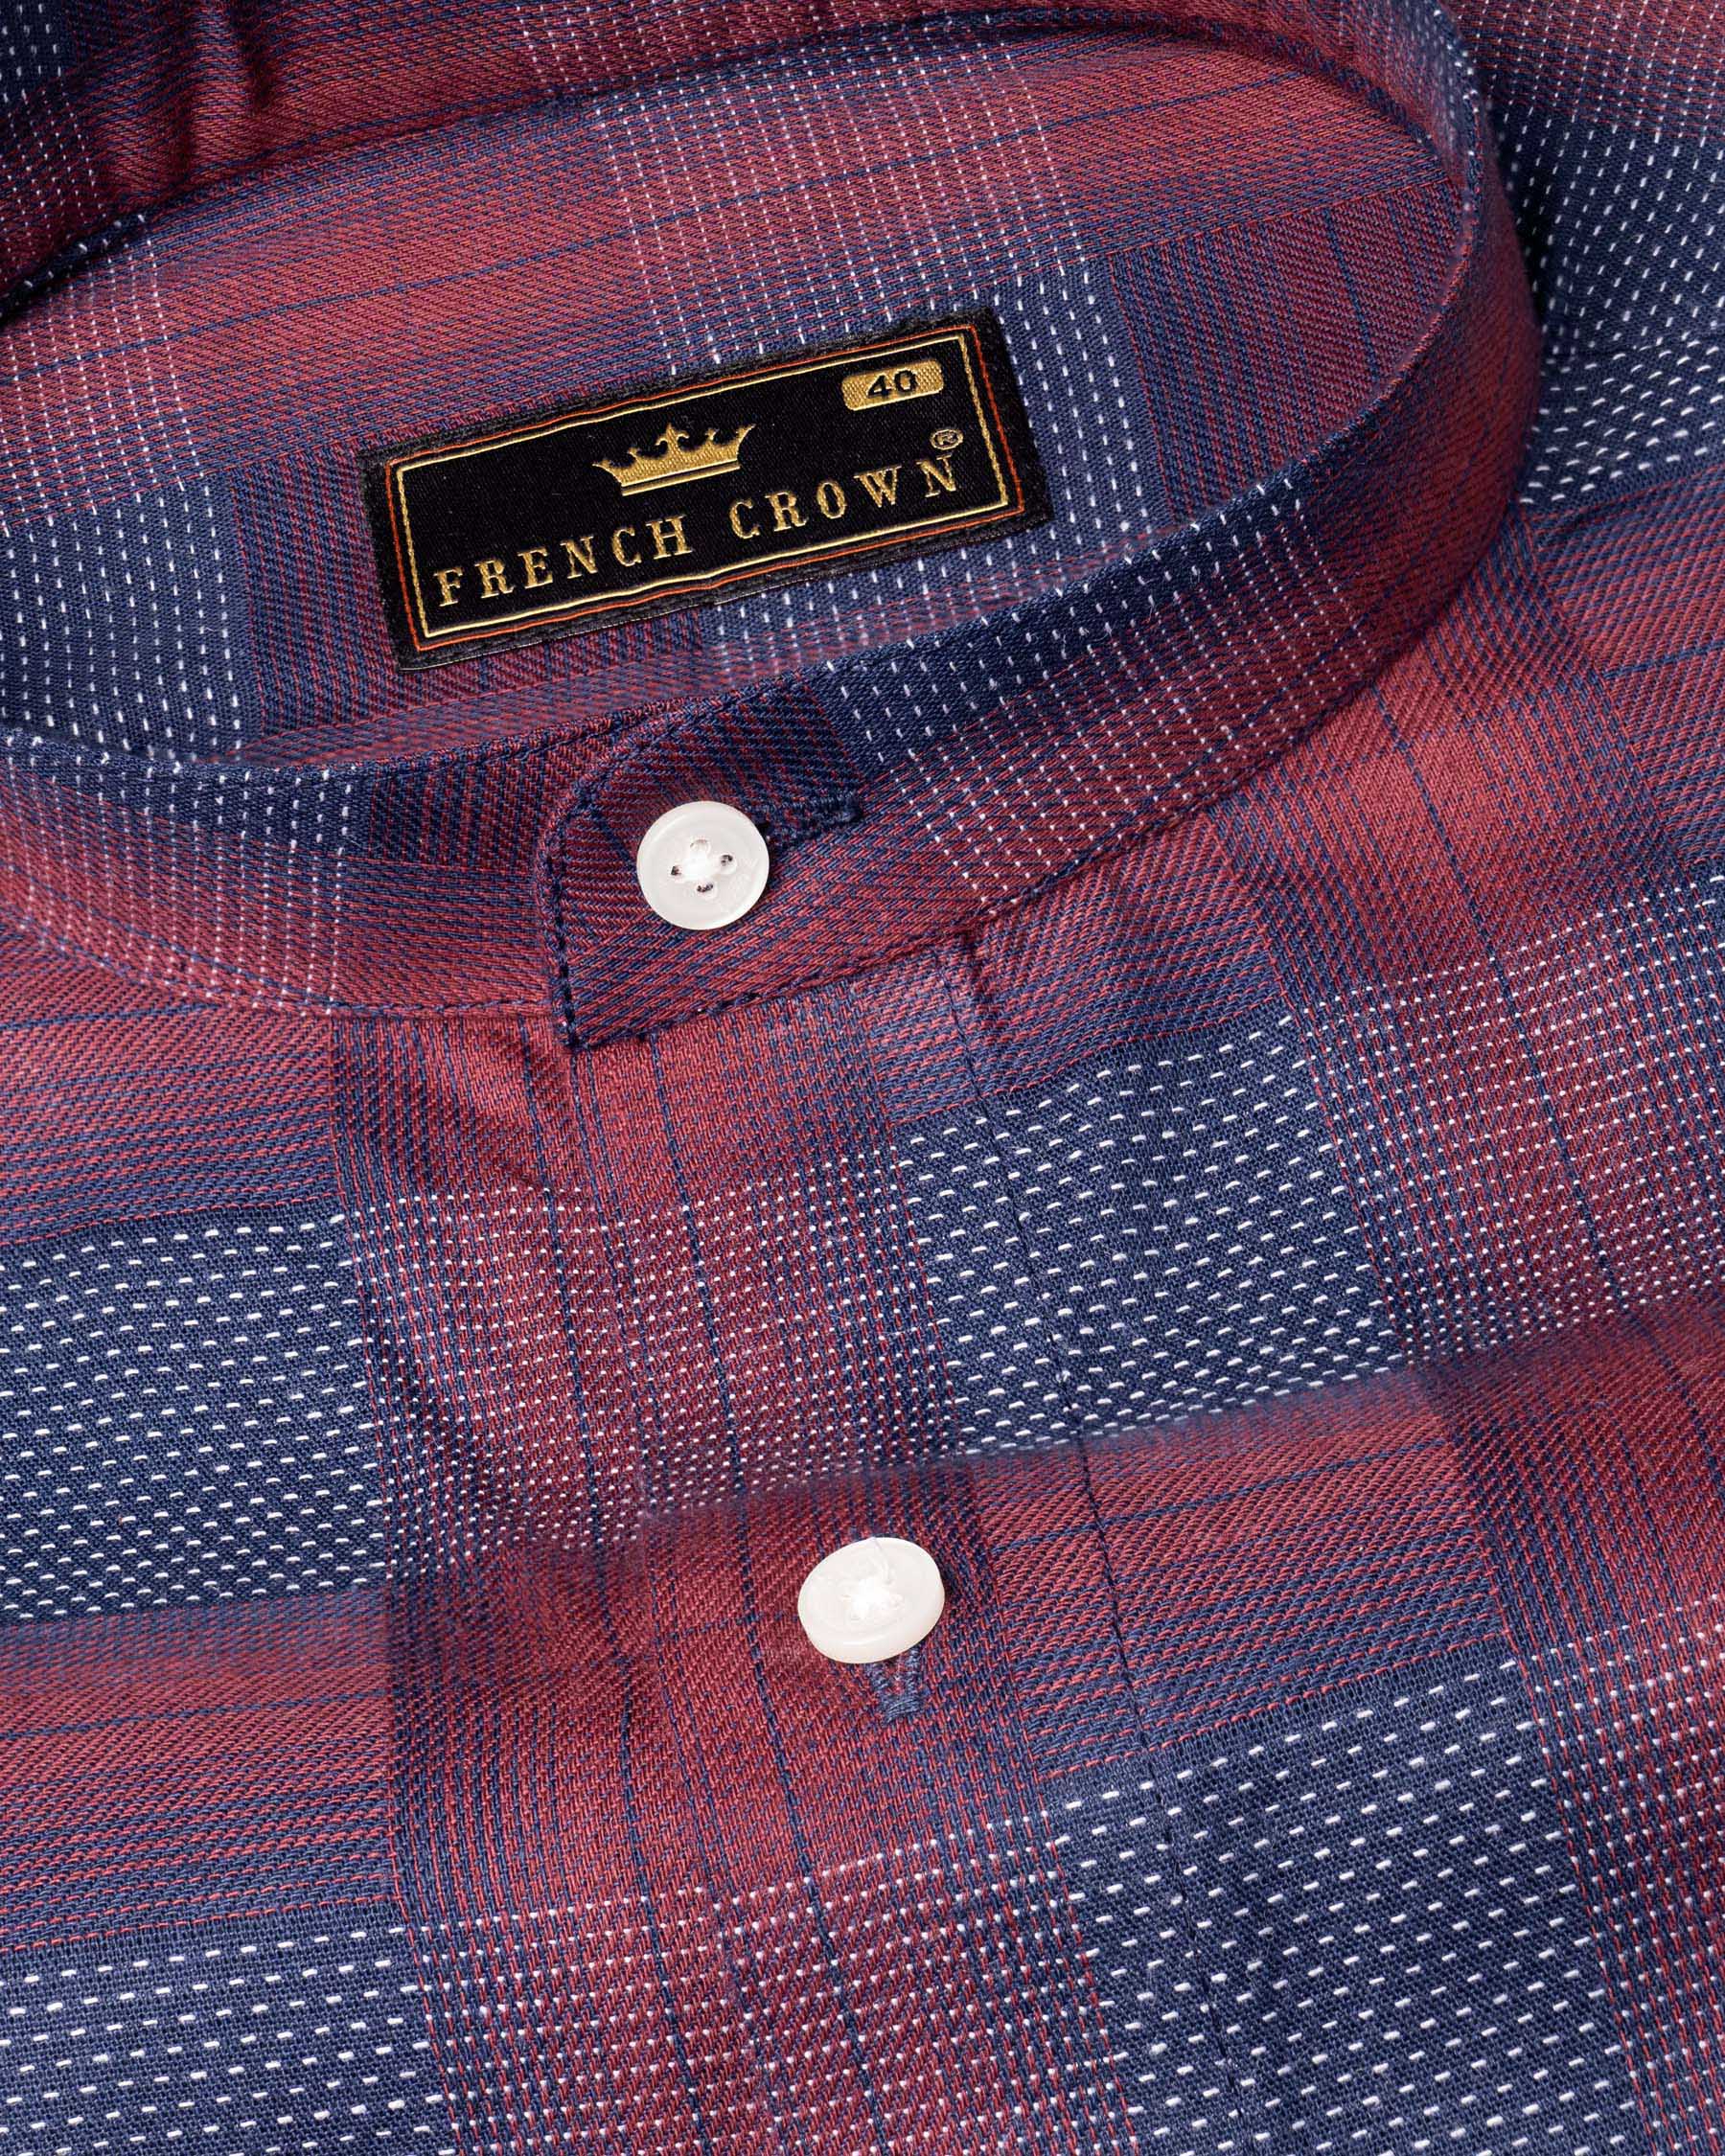 Claret Red with East Bay Twill Plaid Premium Cotton Shirt 6736-M-38,6736-M-38,6736-M-39,6736-M-39,6736-M-40,6736-M-40,6736-M-42,6736-M-42,6736-M-44,6736-M-44,6736-M-46,6736-M-46,6736-M-48,6736-M-48,6736-M-50,6736-M-50,6736-M-52,6736-M-52